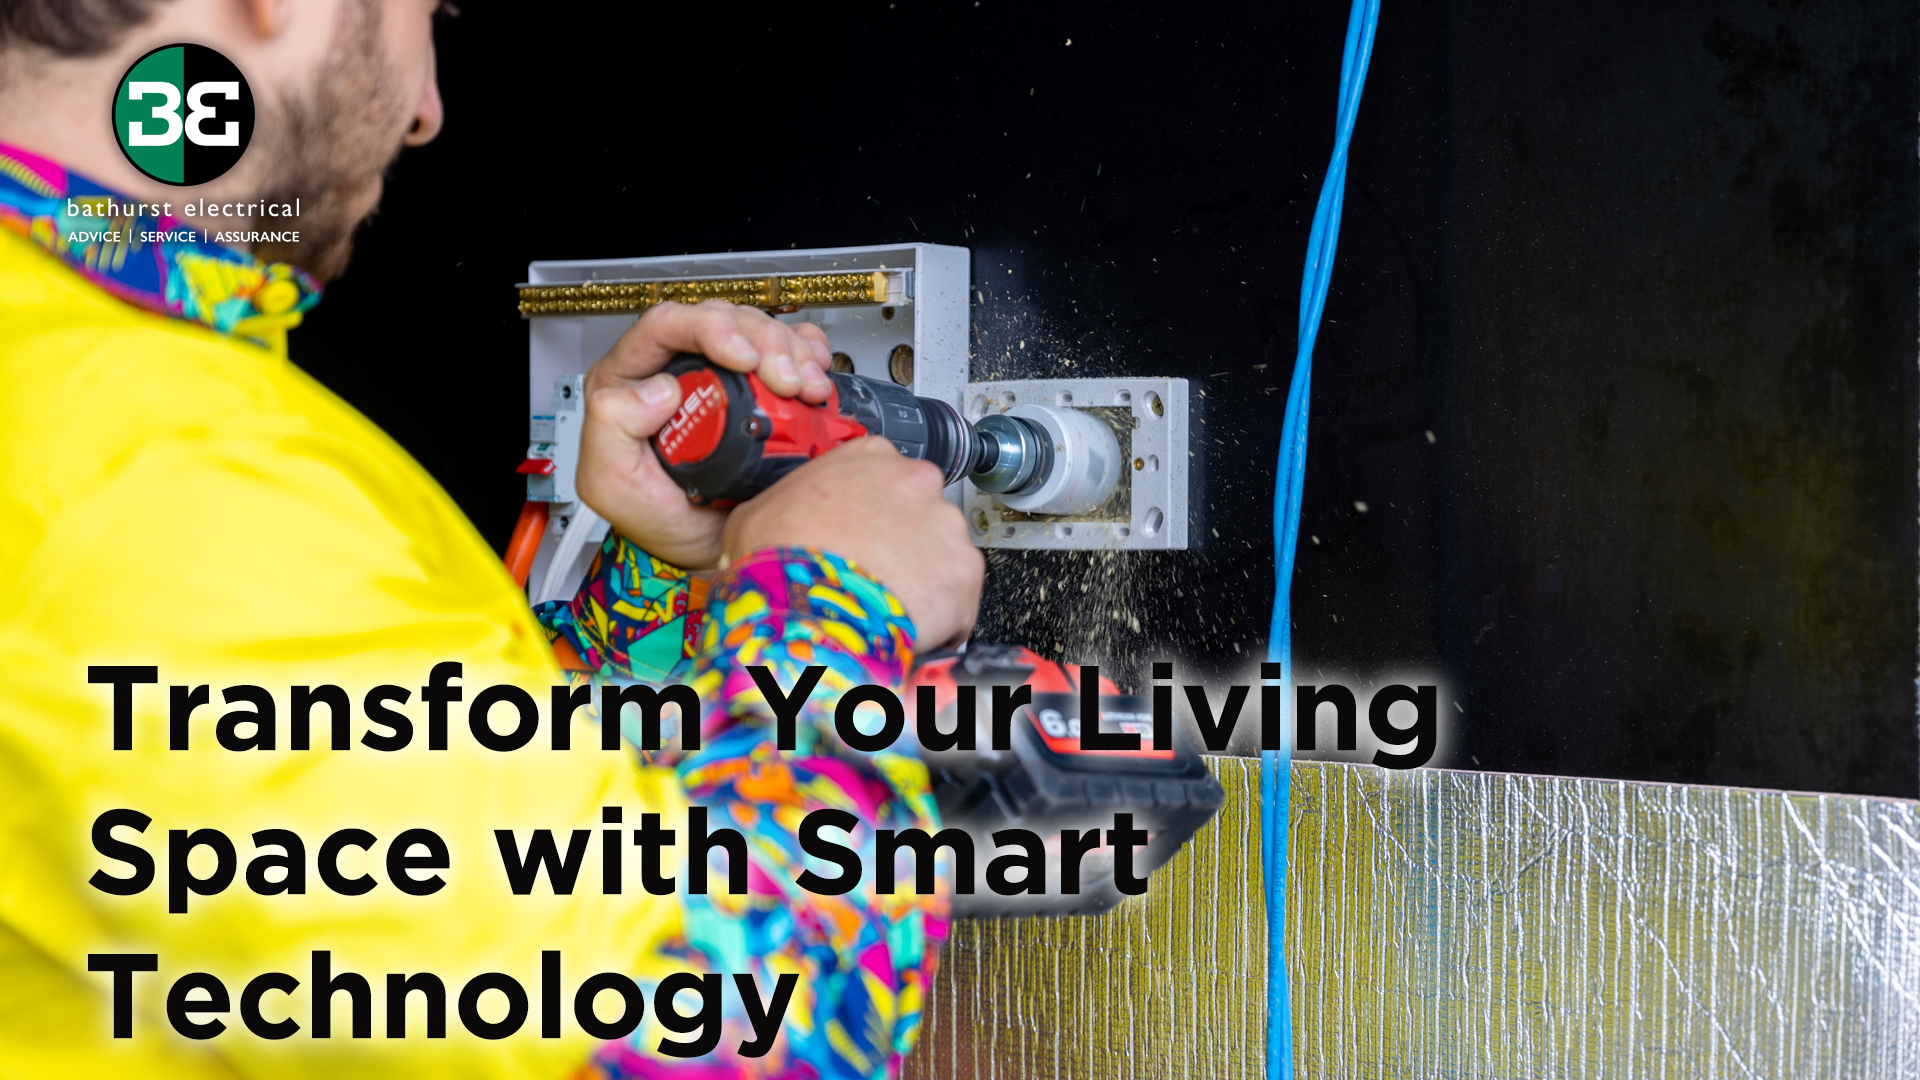 Smart Technology: Transform Your Living Space with Bathurst Electrical